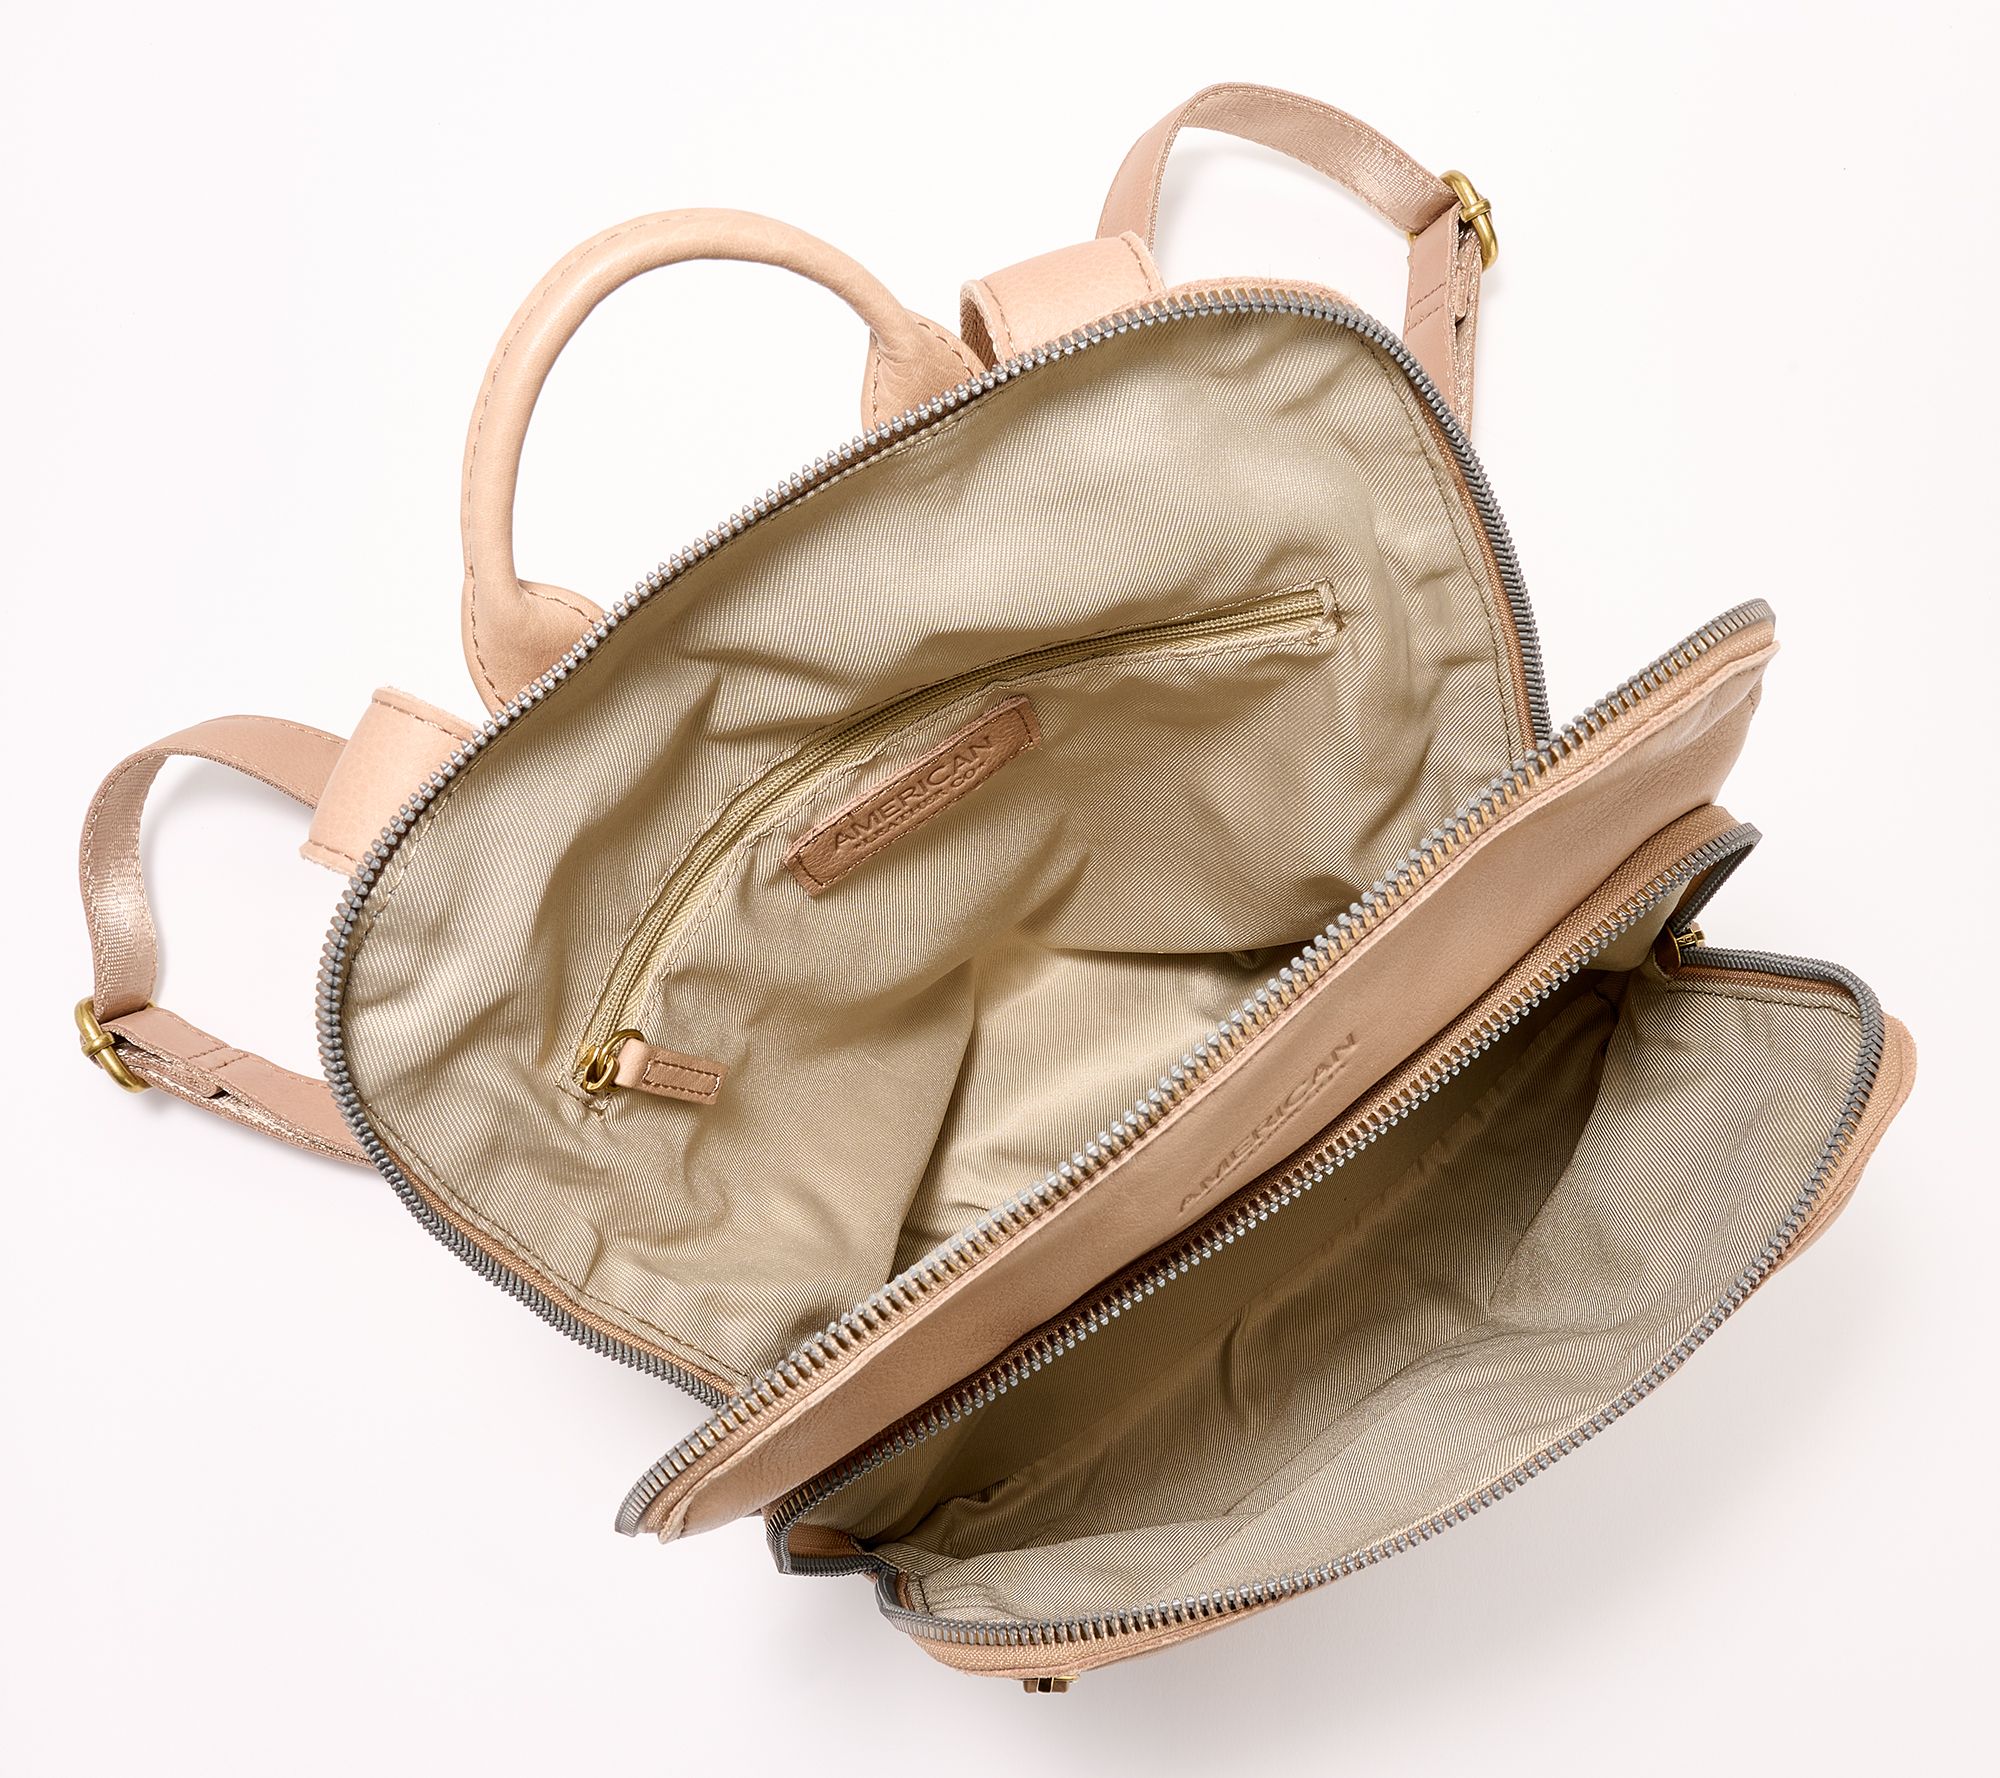 American Leather Co. Cleveland Leather Backpack - QVC.com